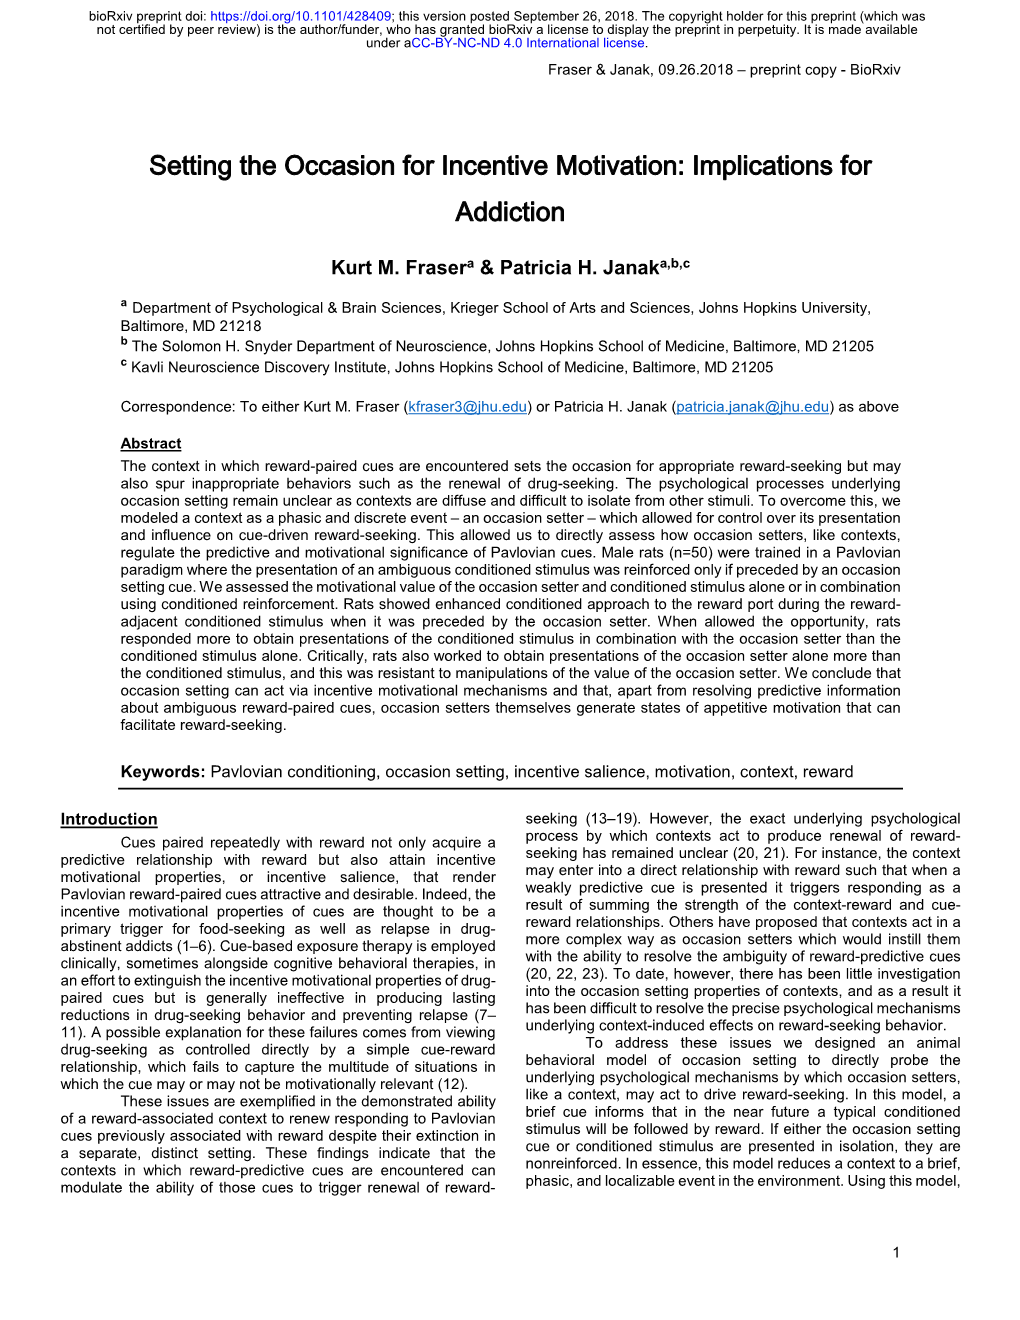 Setting the Occasion for Incentive Motivation: Implications for Addiction